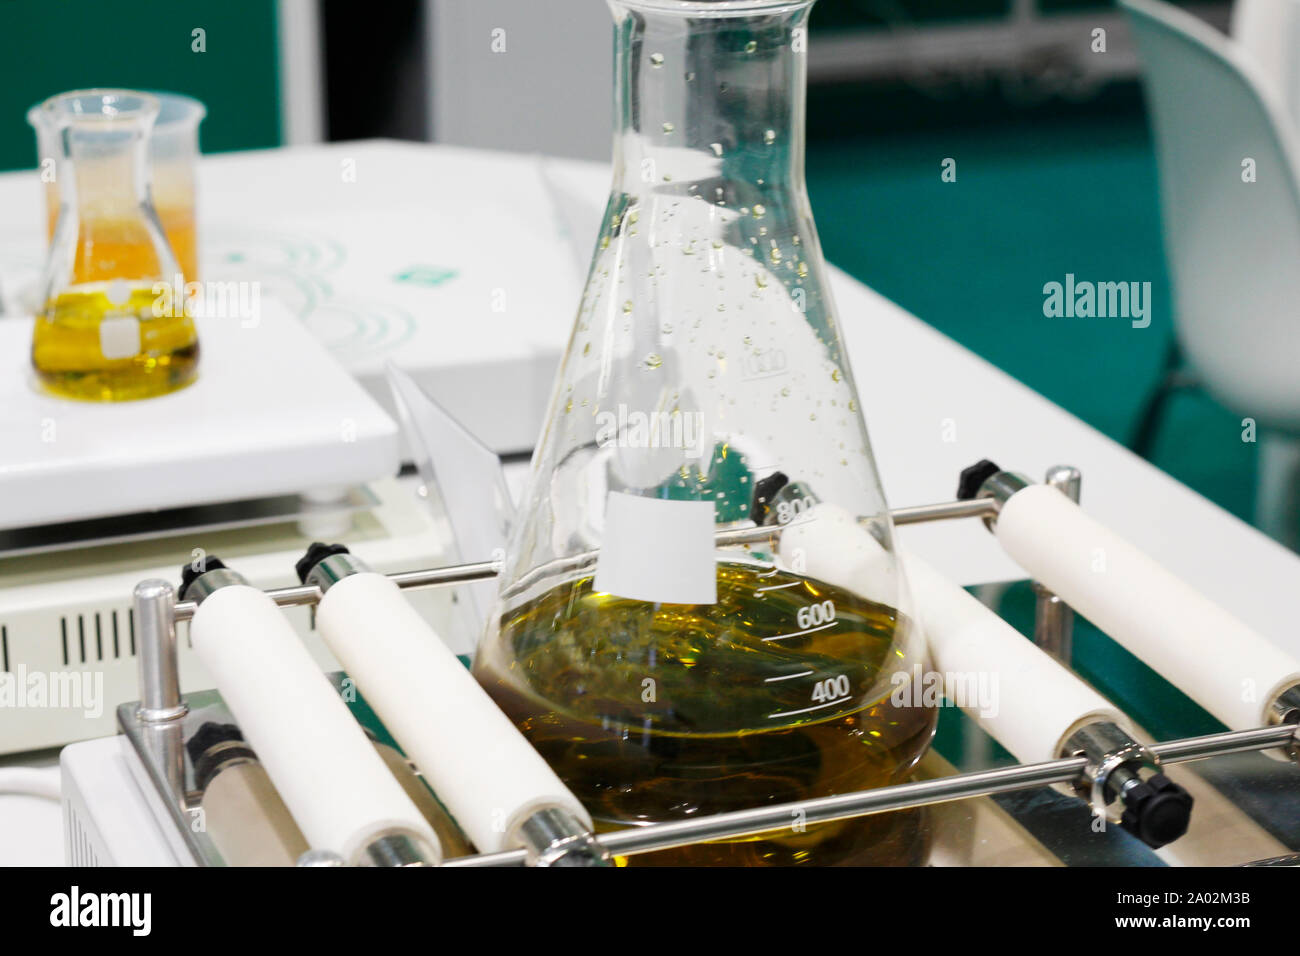 Chemical laboratory. Flasks and dishes with solutions ready for research activities. Laboratory test tubes and flasks. Stock Photo